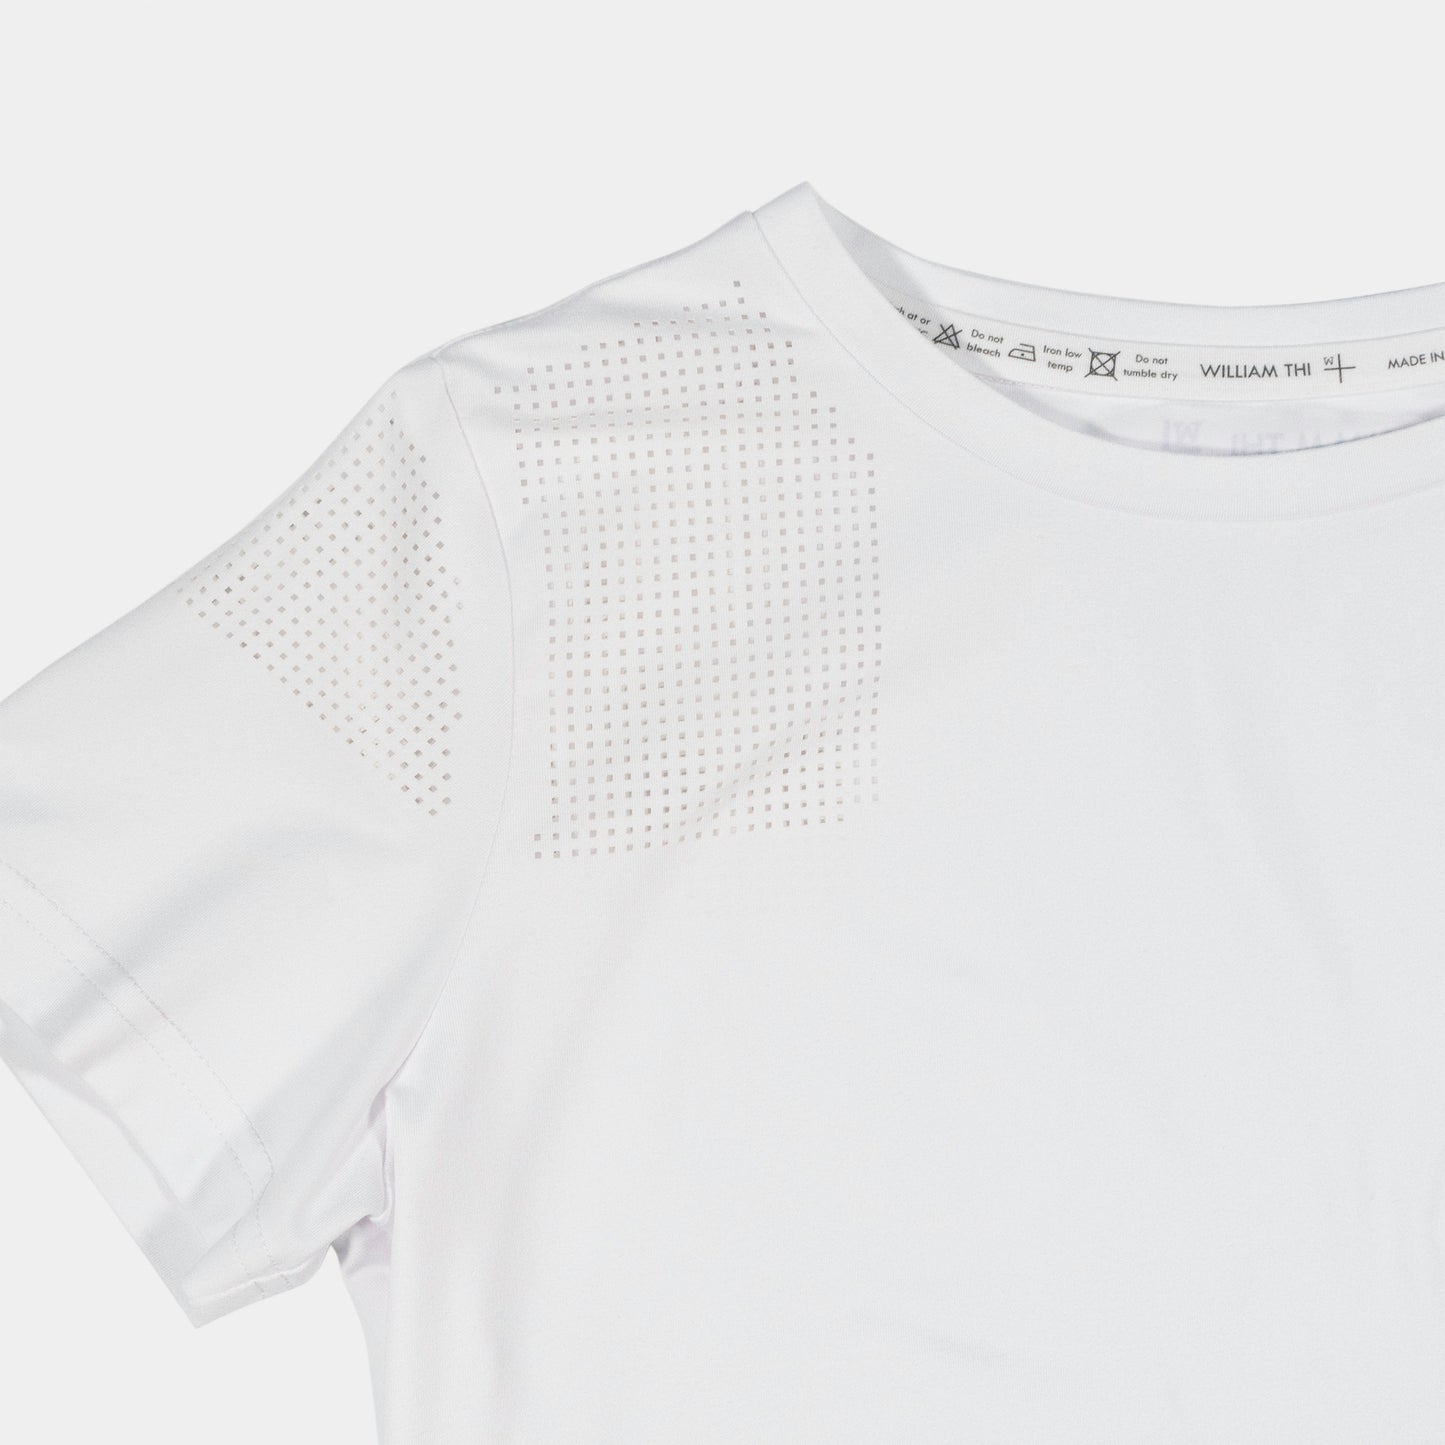 The Patterned Laser Cut T-Shirt